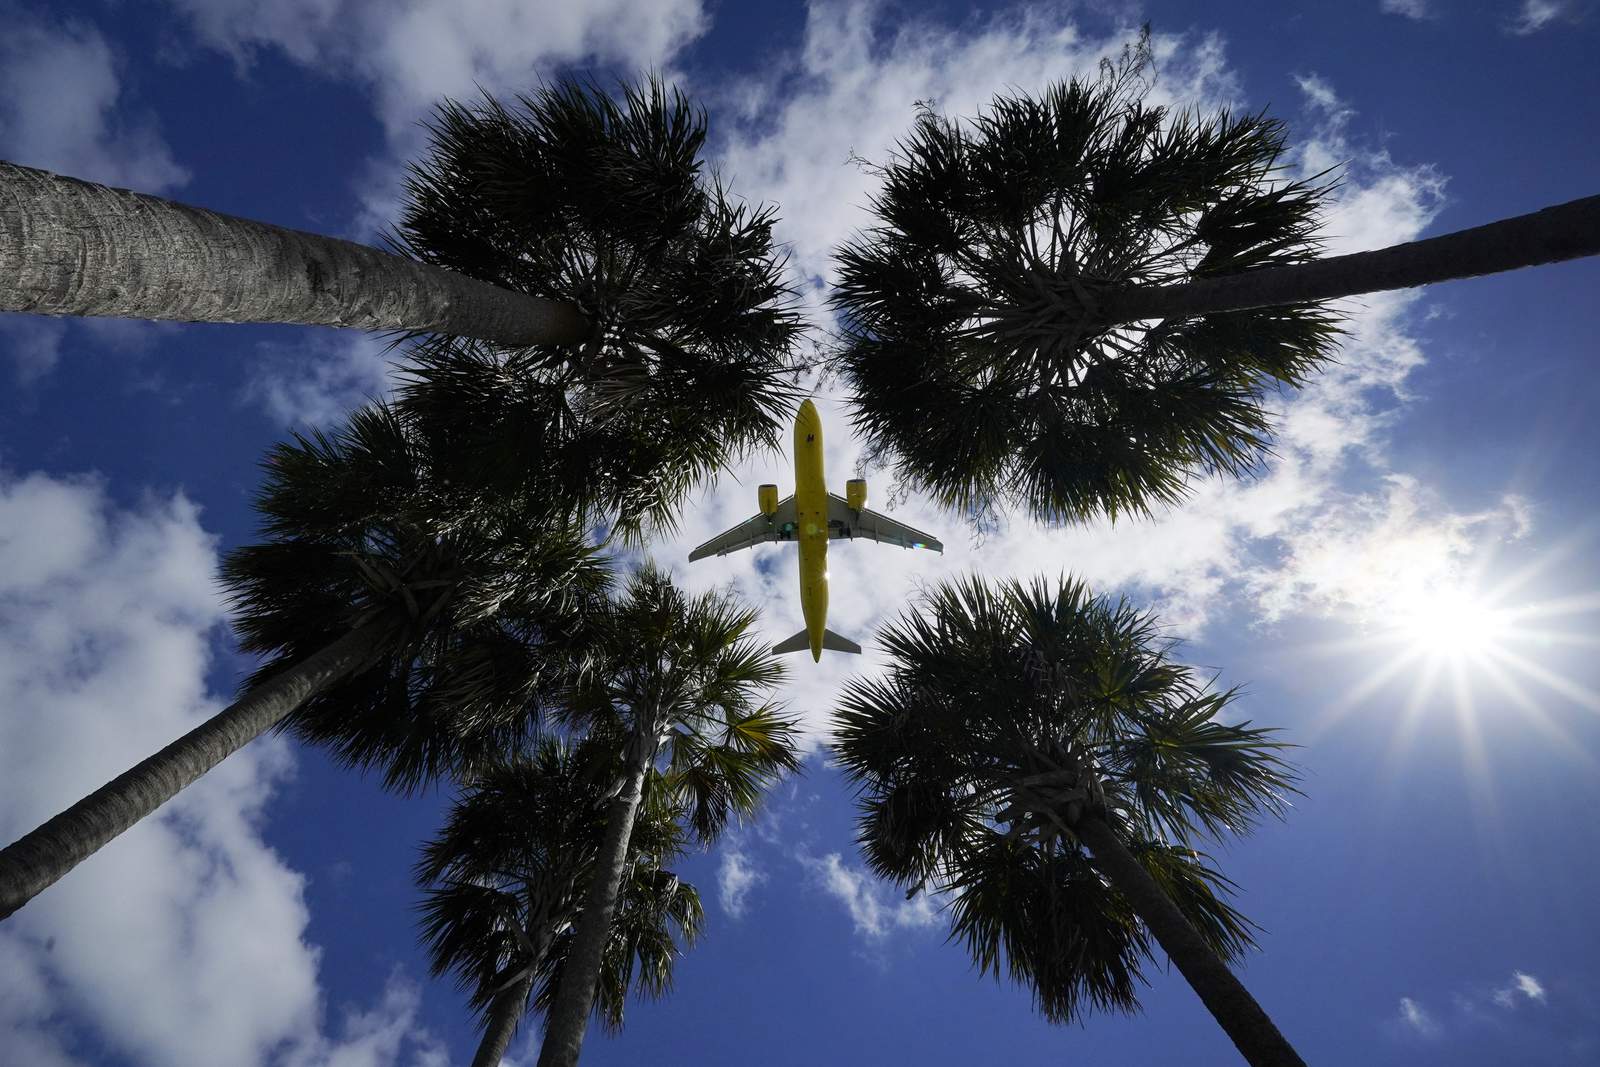 Air travelers top 1.5 million for first time in over a year